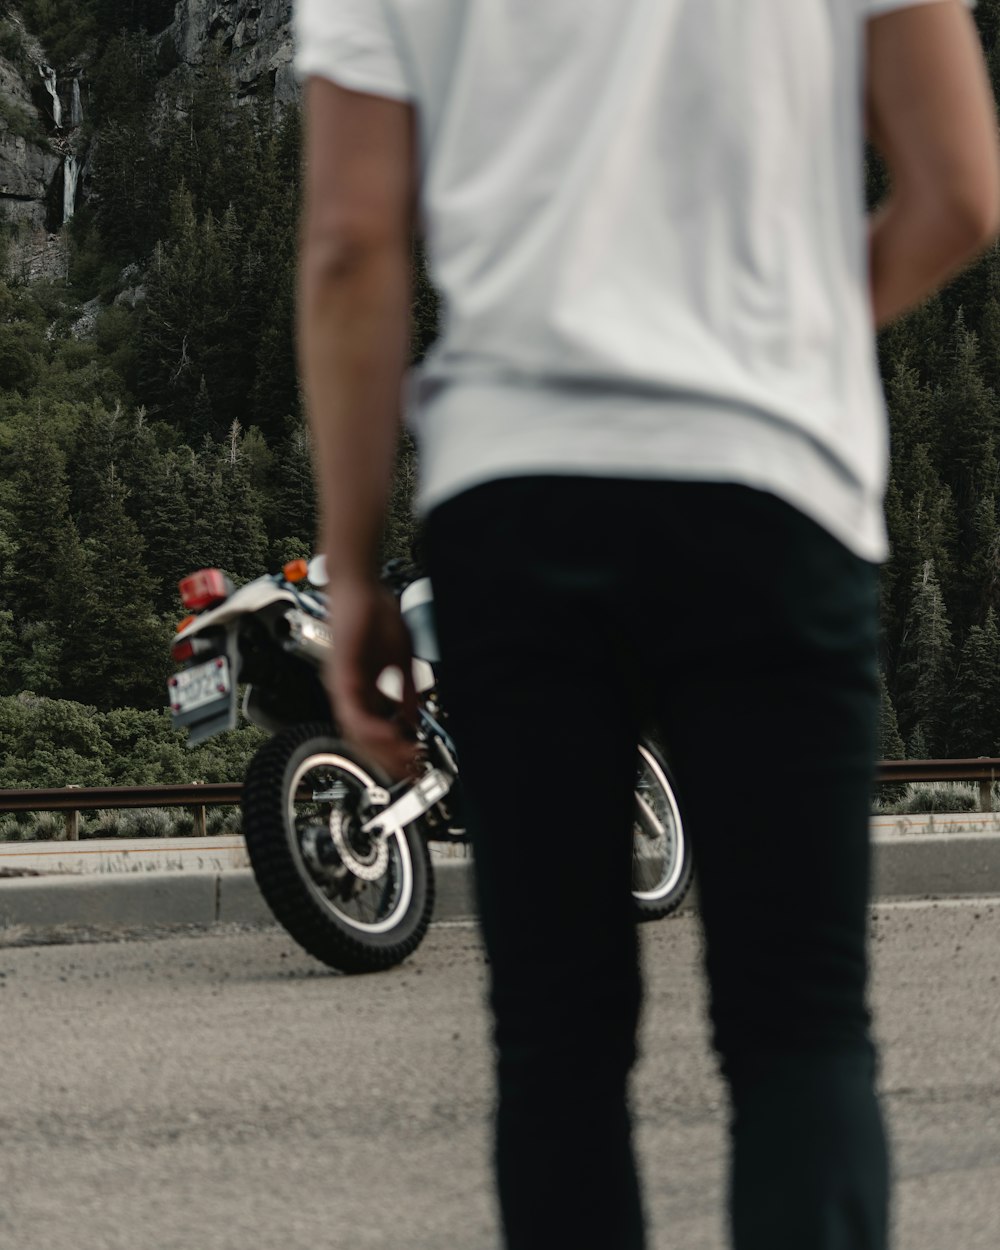 man in white tank top and black pants riding on motorcycle